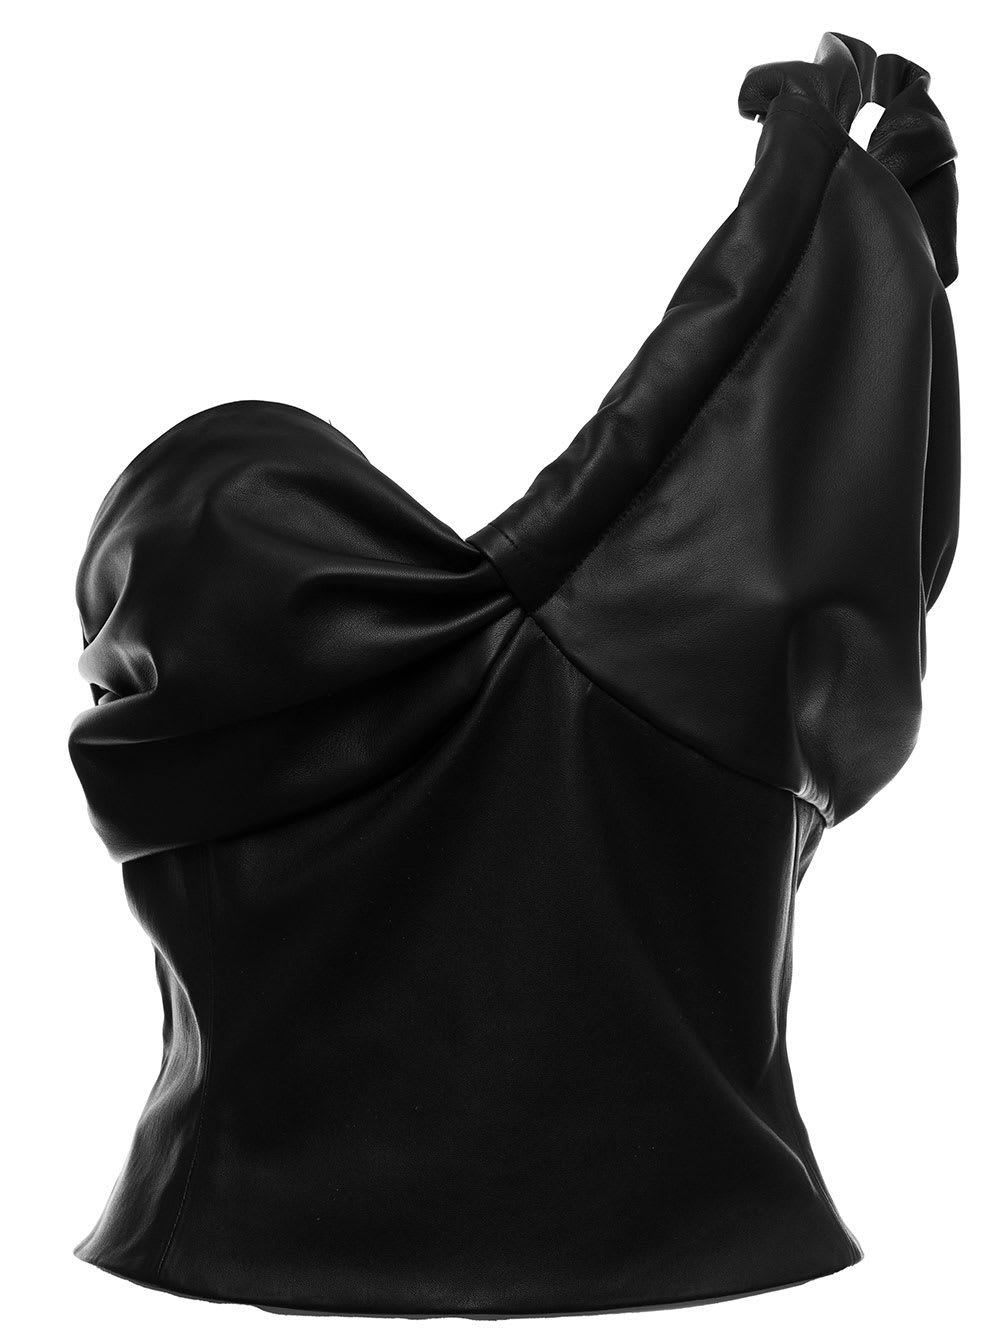 The Mannei Womans Black Leather One Shoulder Top